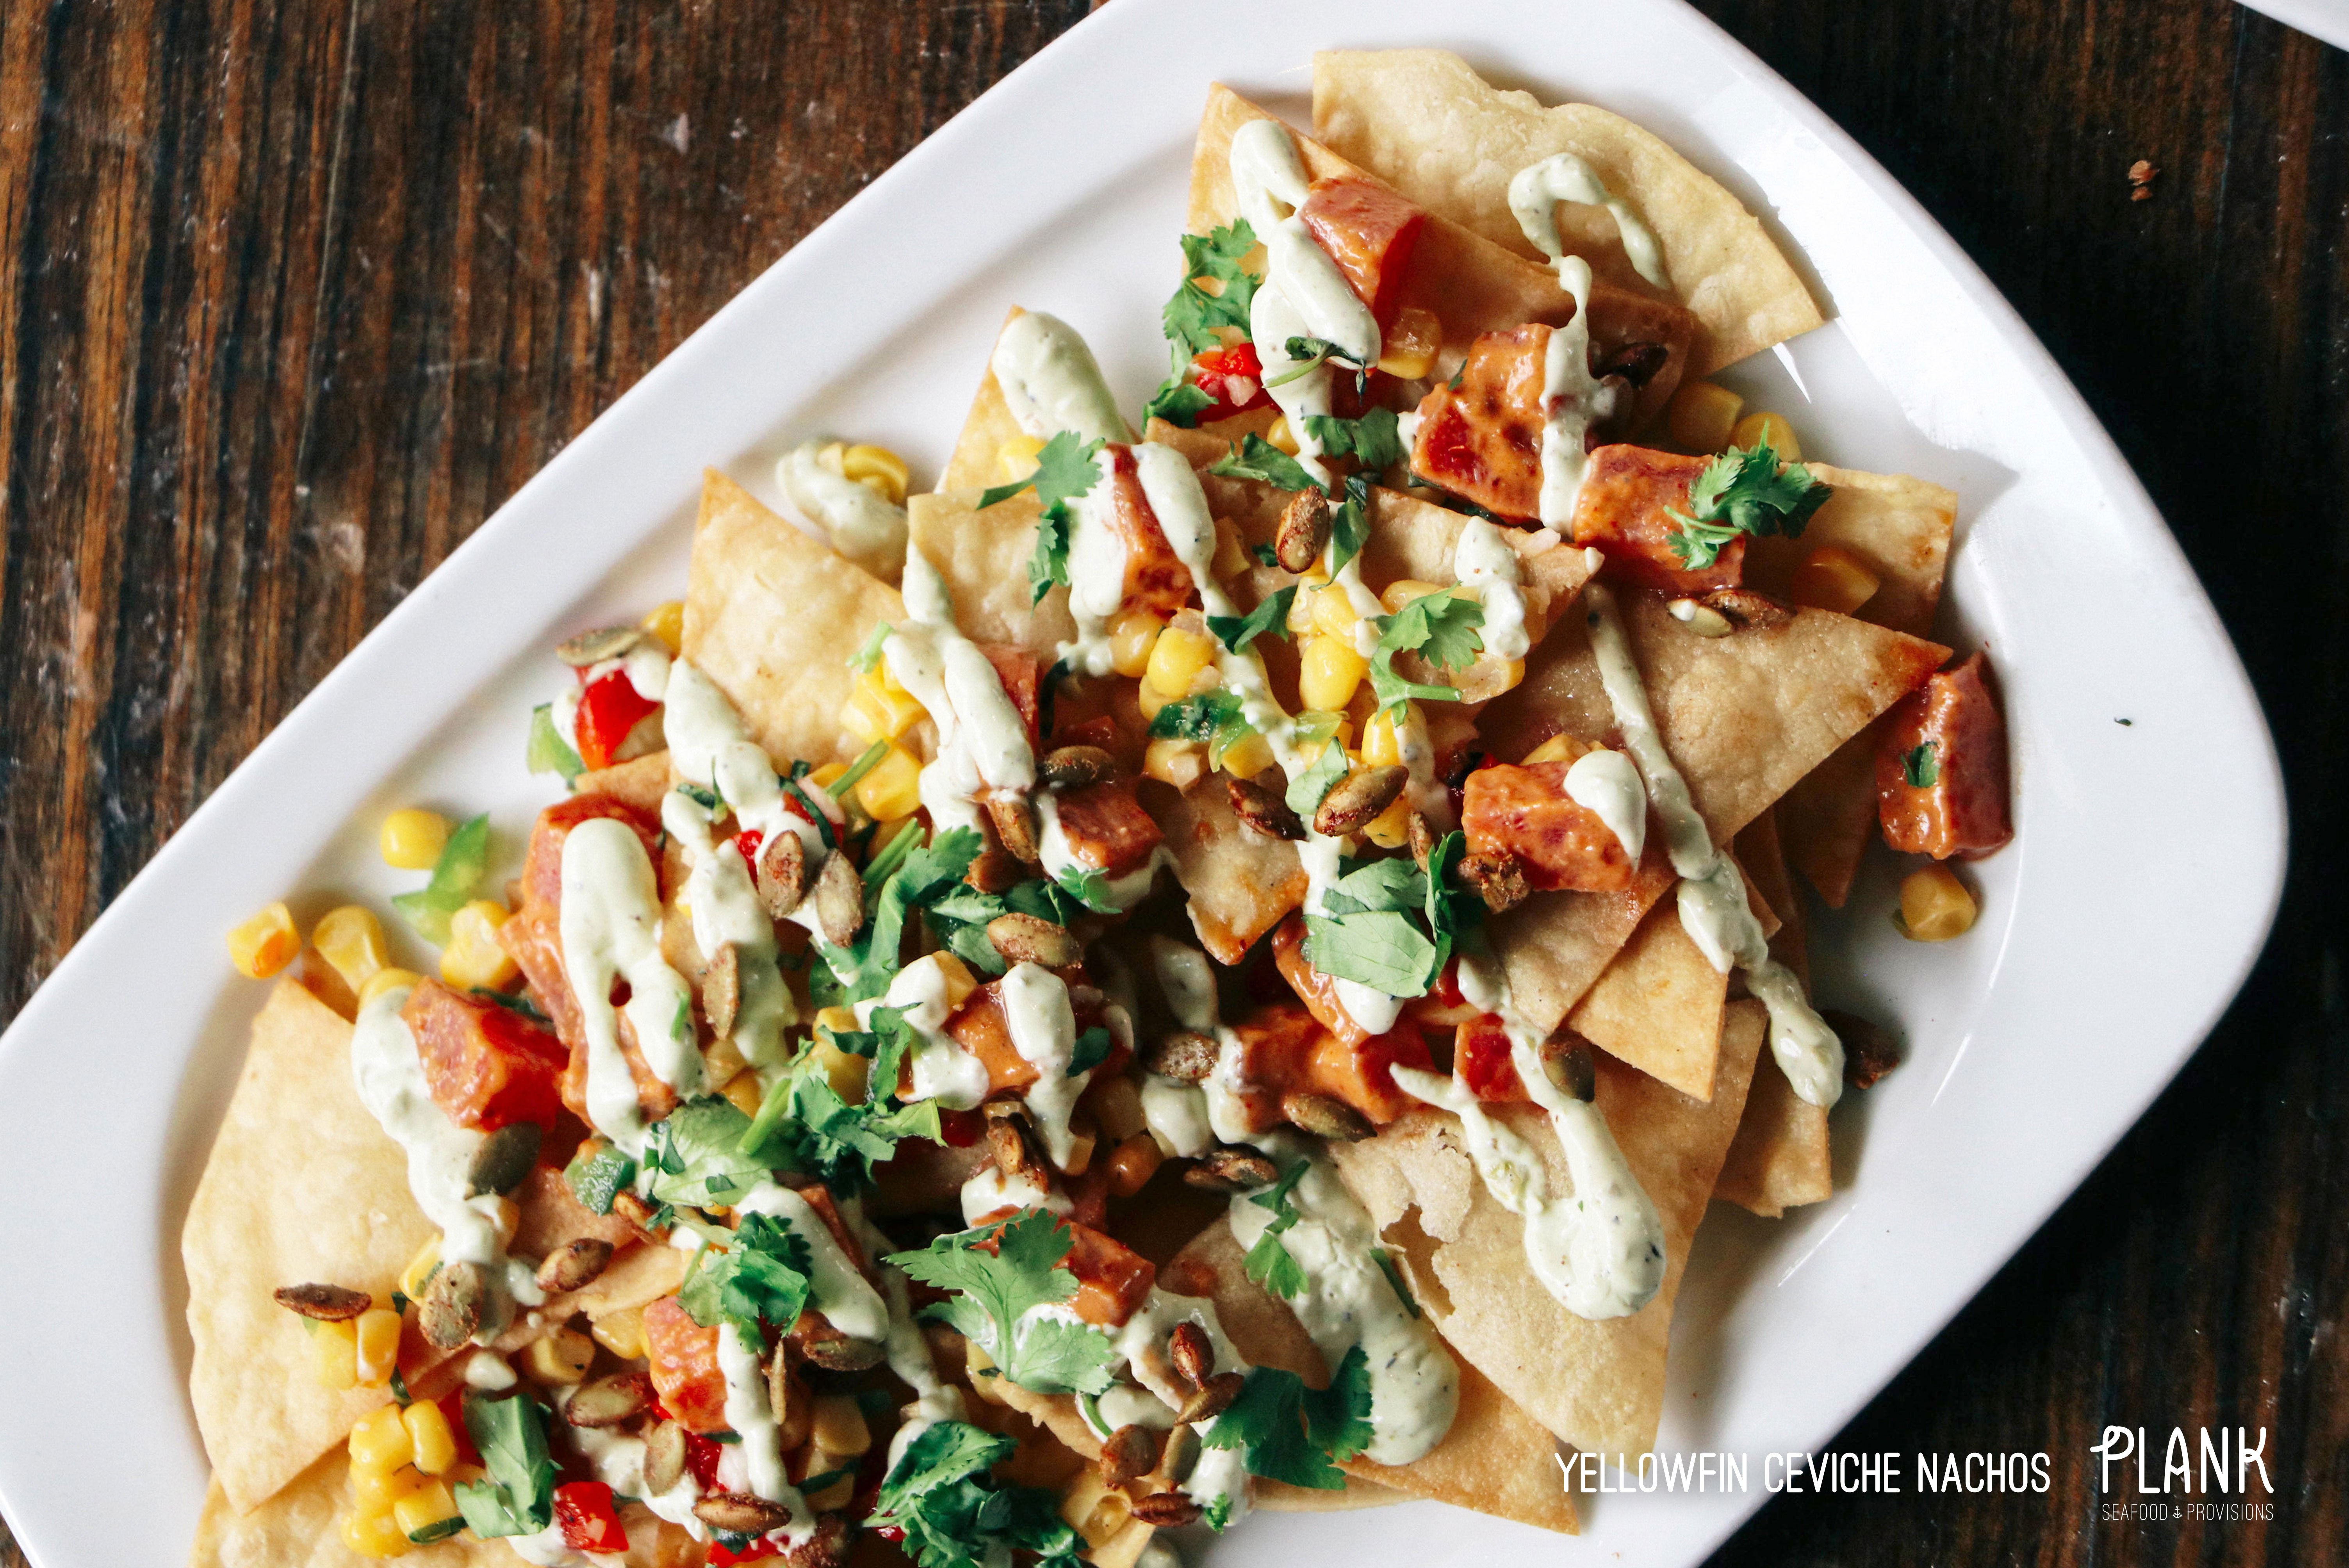 Yellowfin Ceviche Nachos | Plank Seafood Provisions